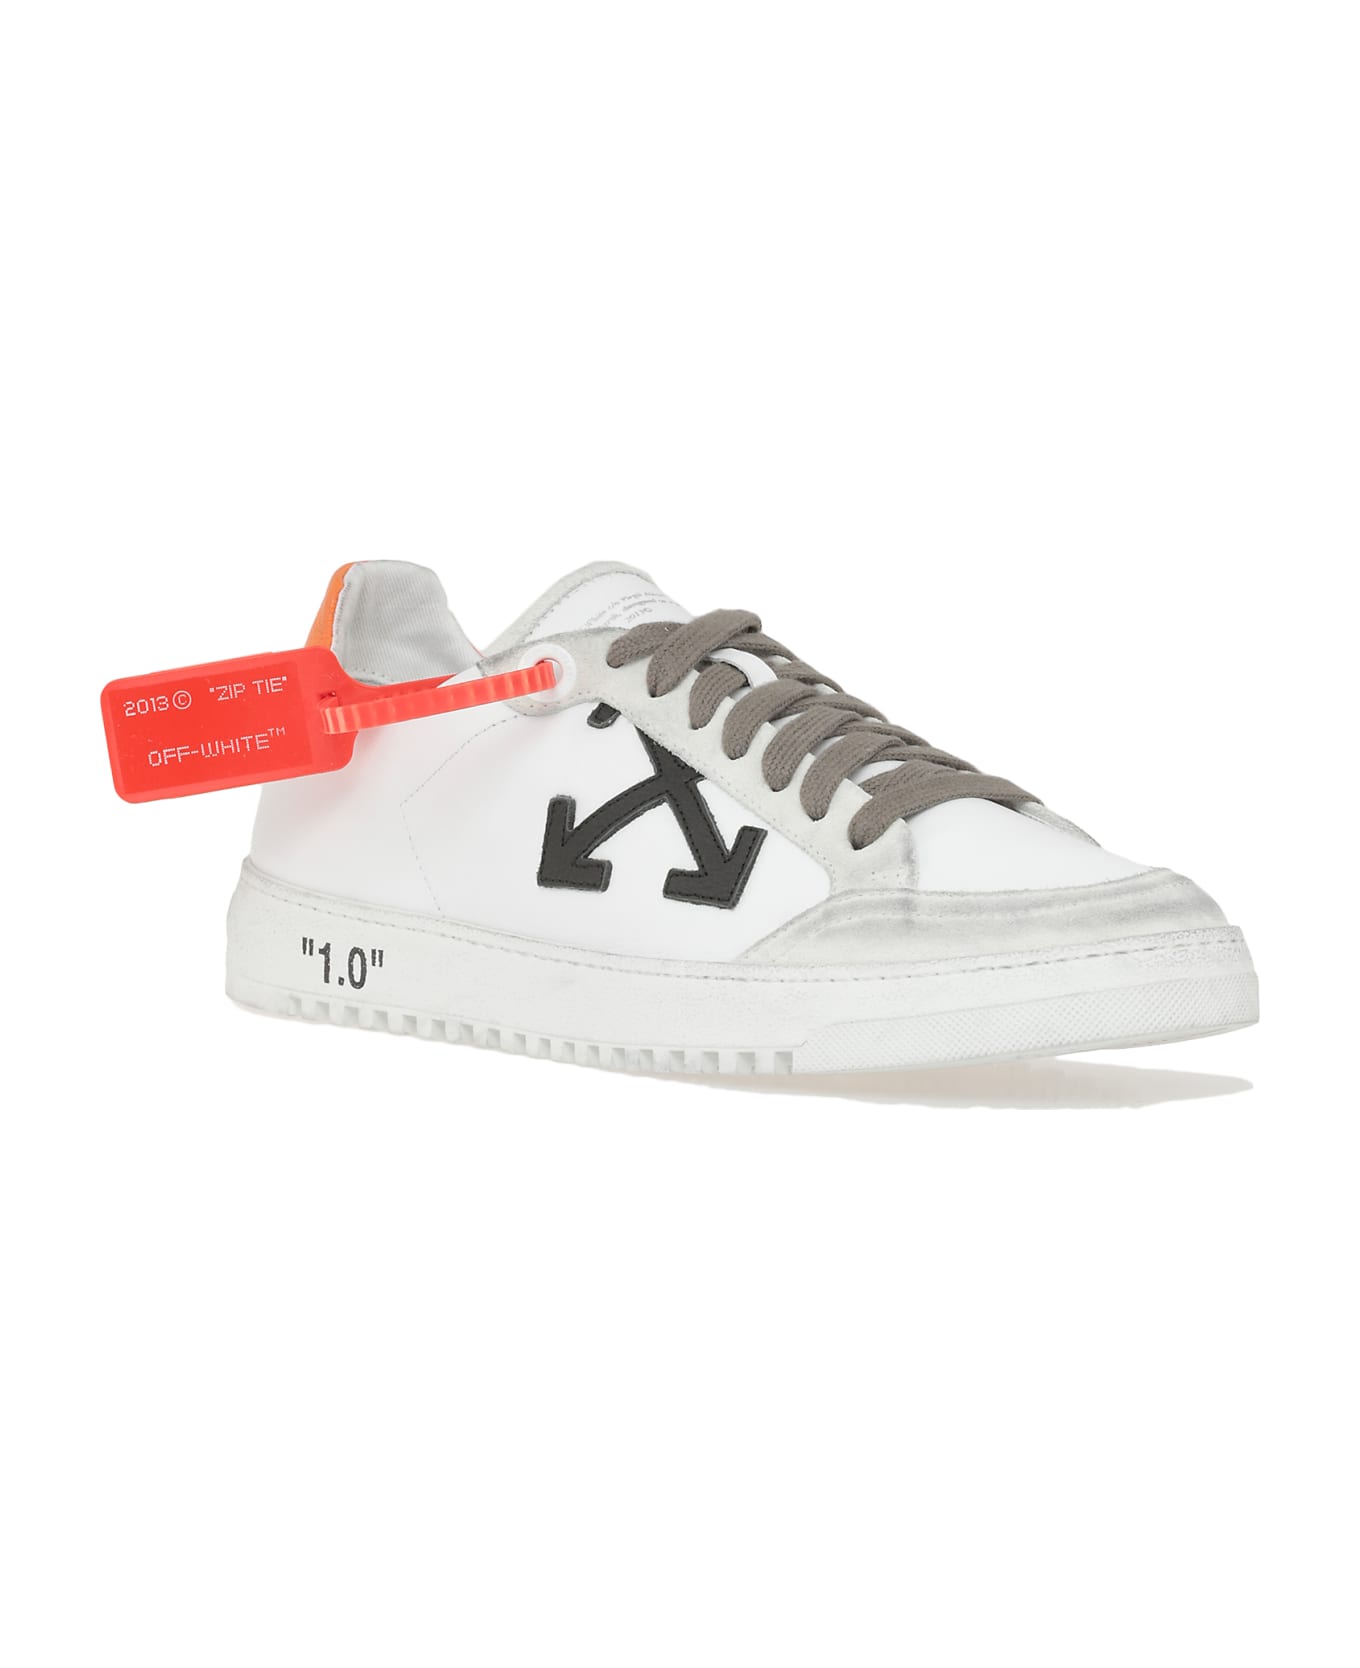 Off-White 2.0 Sneakers | italist